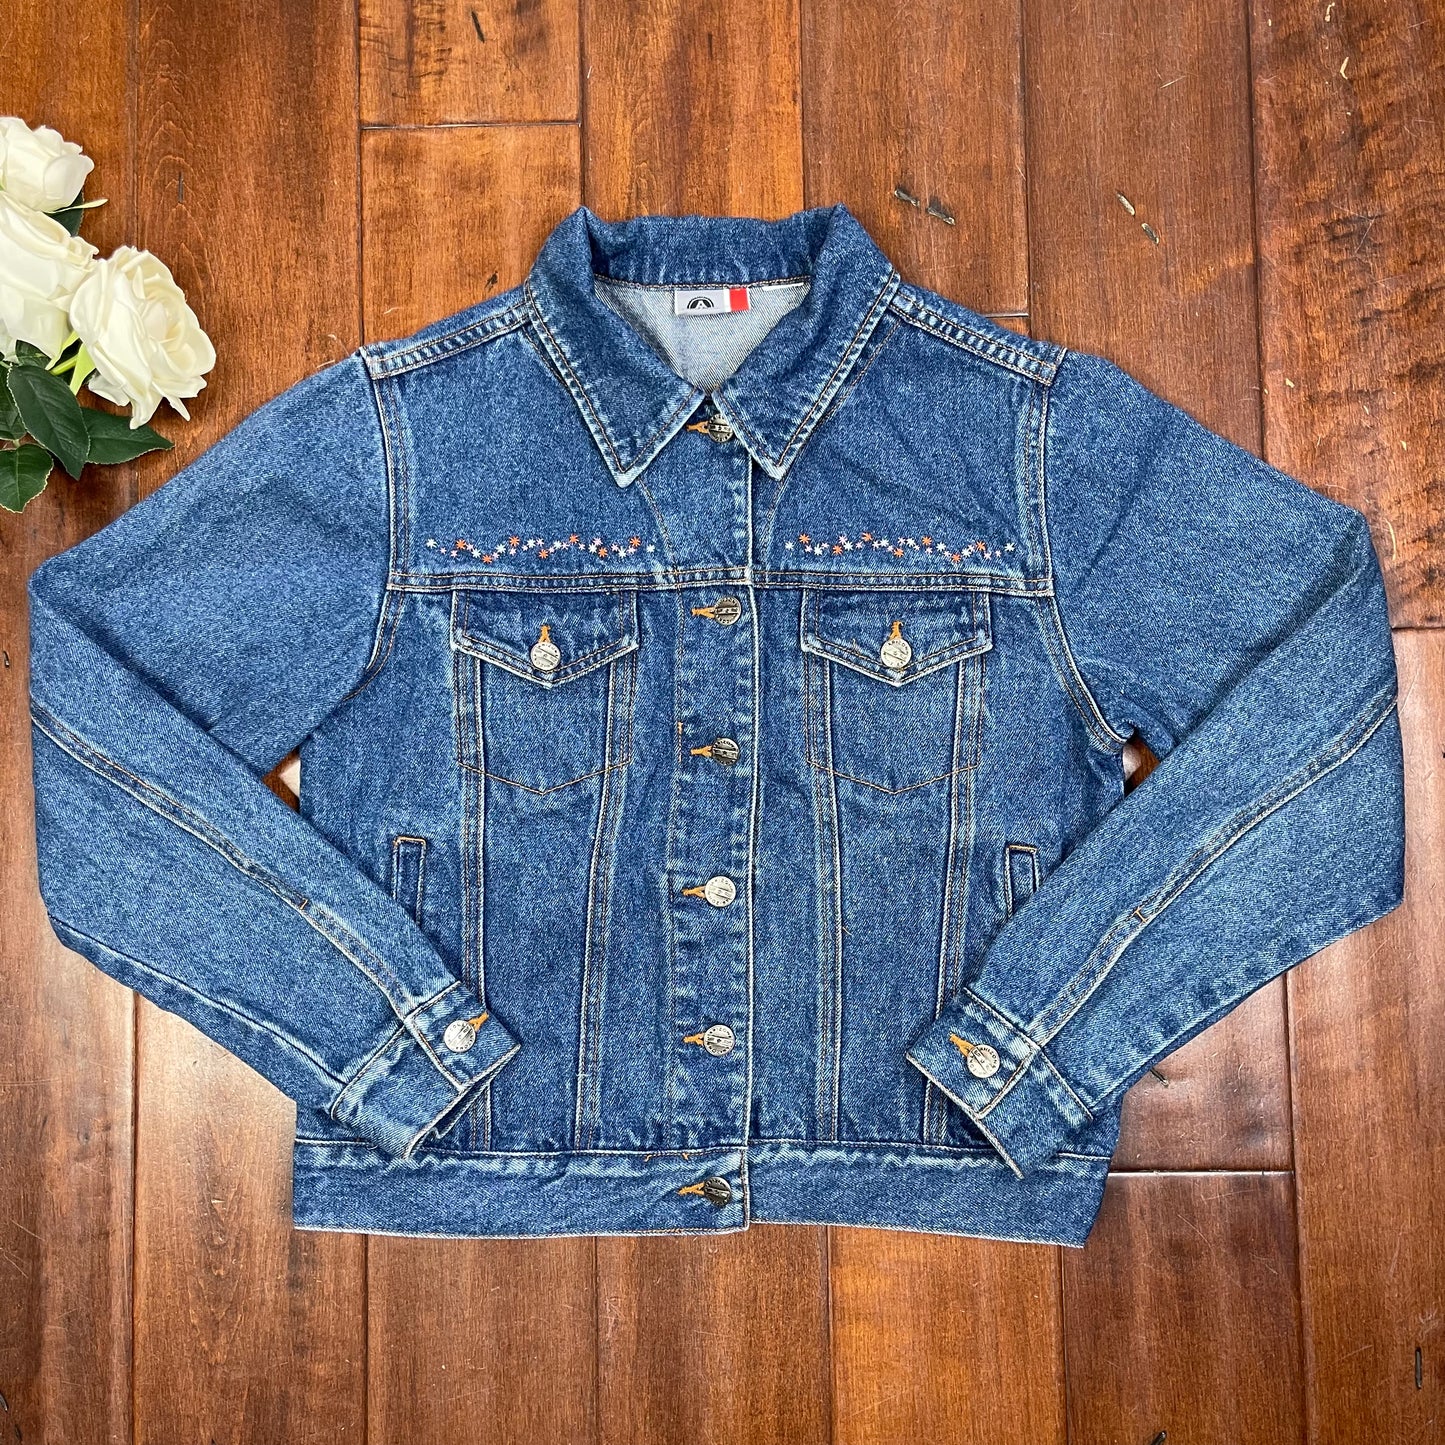 THRIFTED STARS EMBROIDERED JEAN JACKET